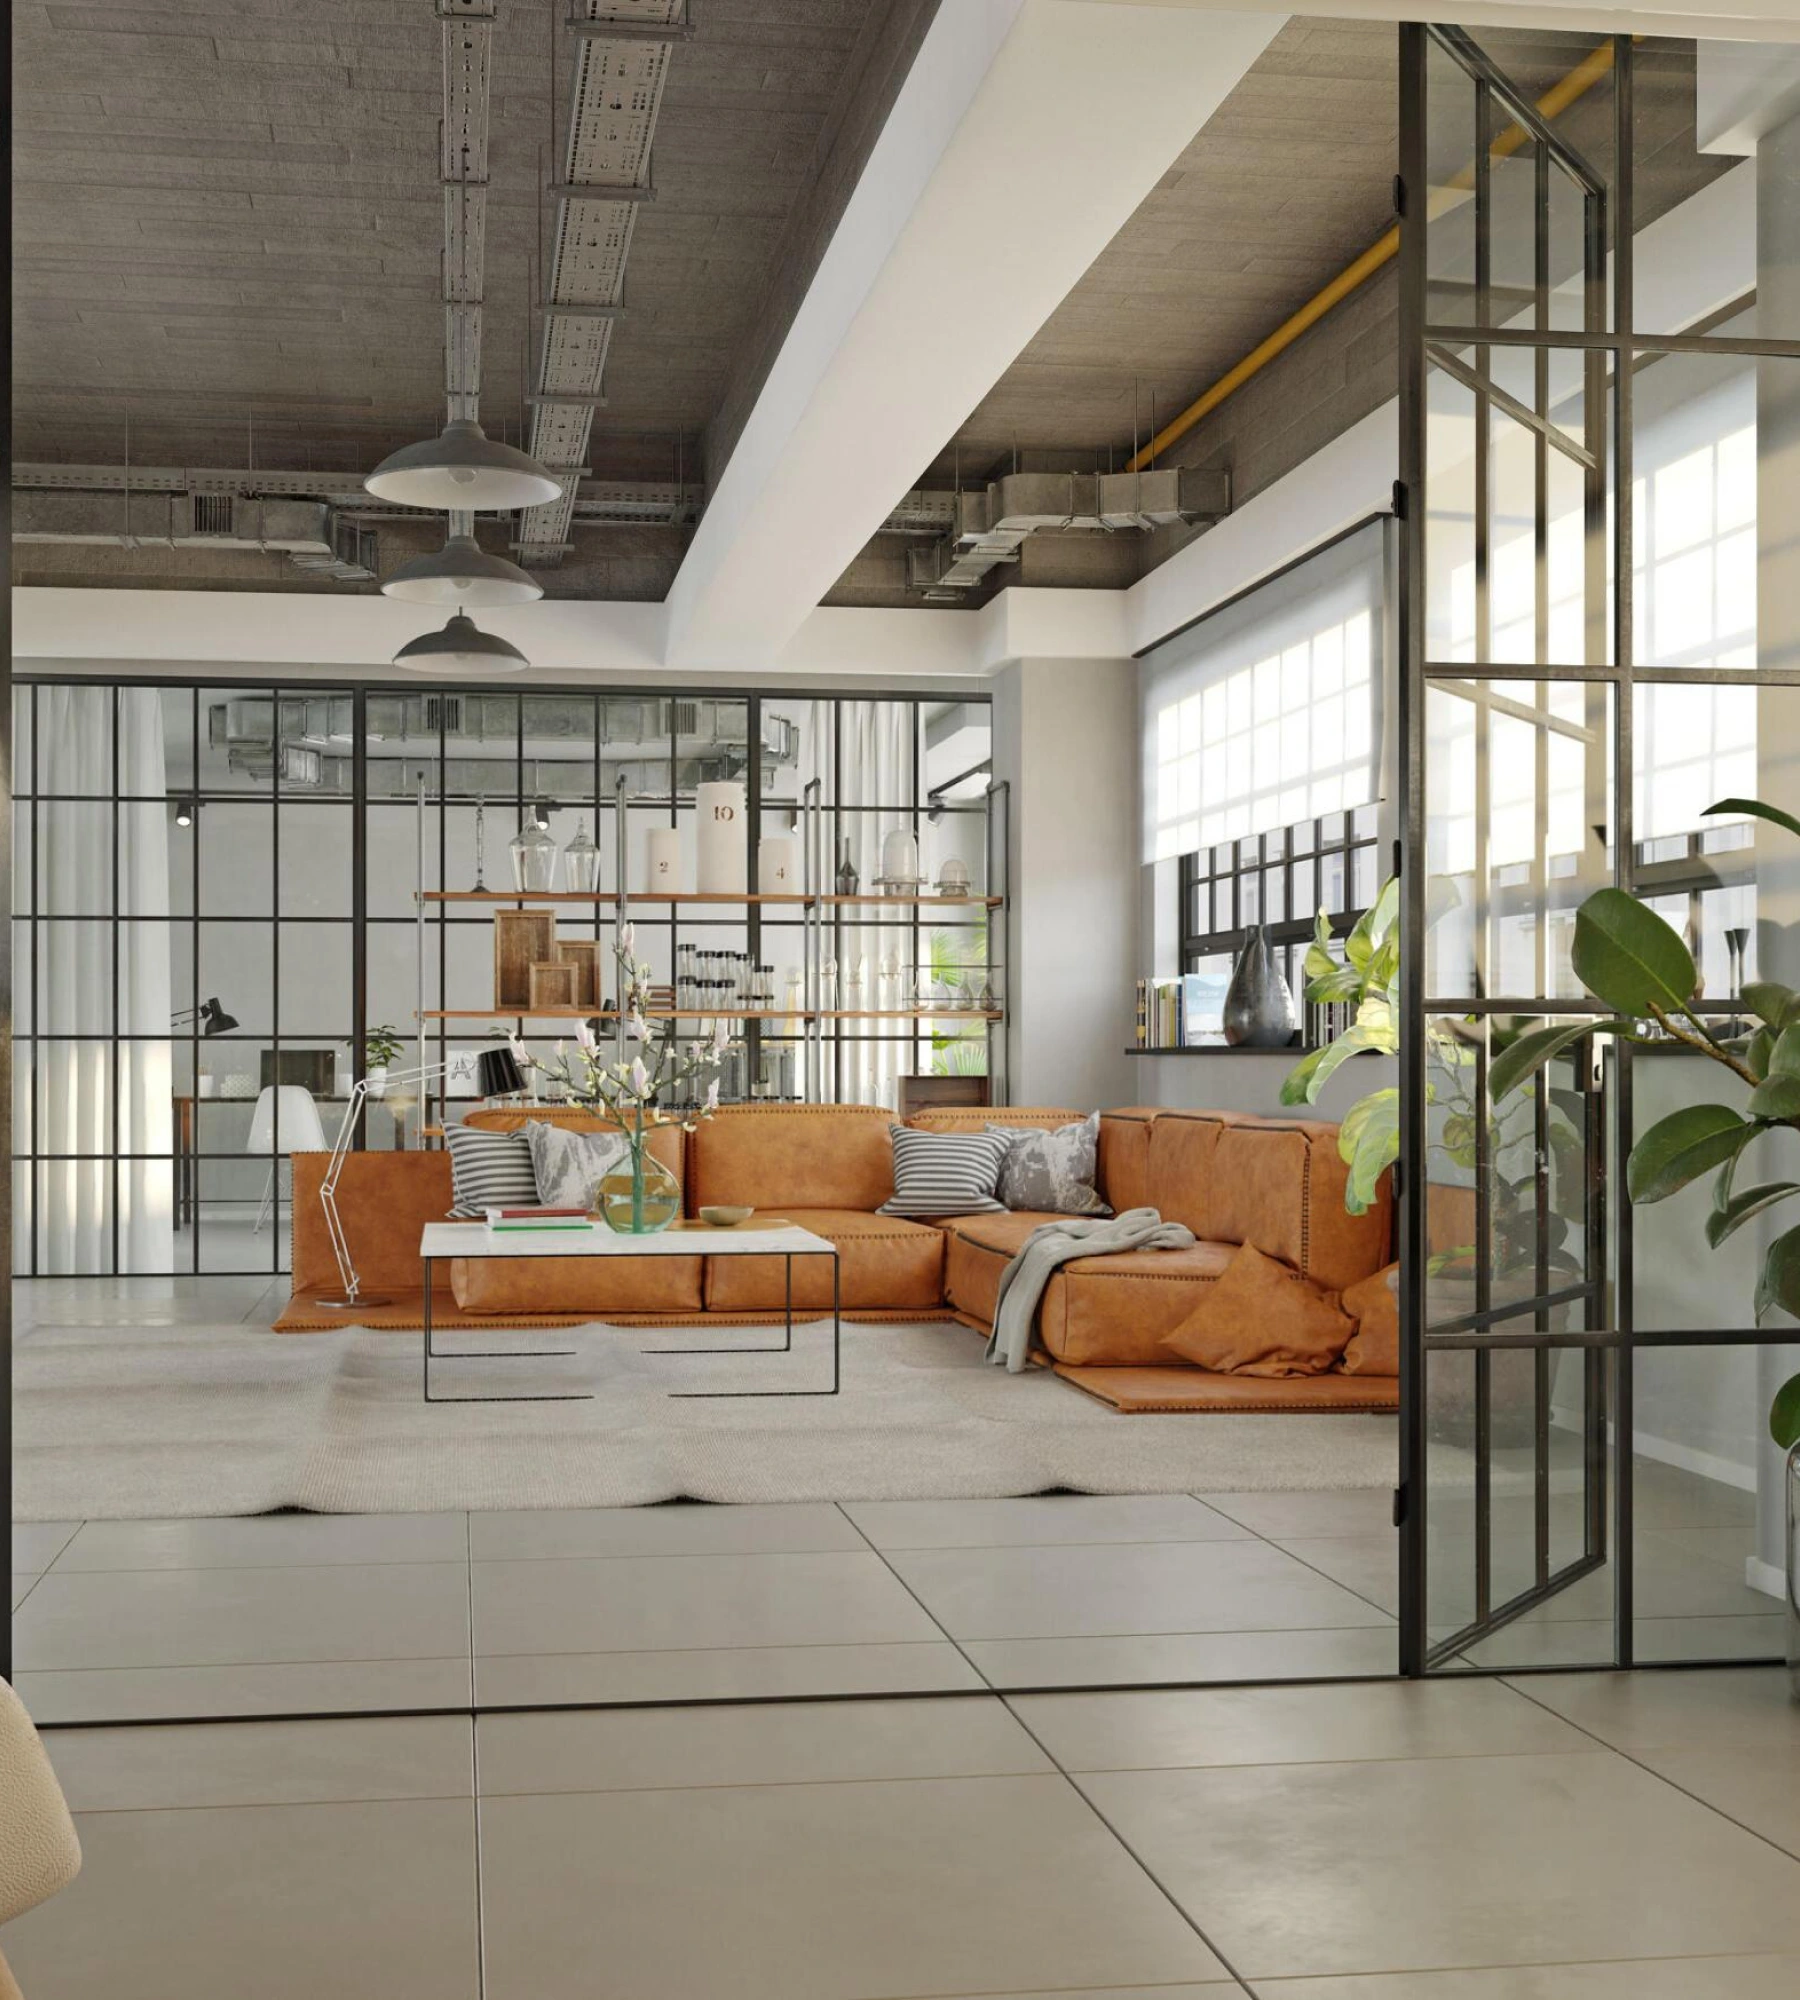 Chic office lounge with caramel leather sofas, glass room dividers, industrial ceiling, and a blend of modern and greenery elements | Elite Interiors